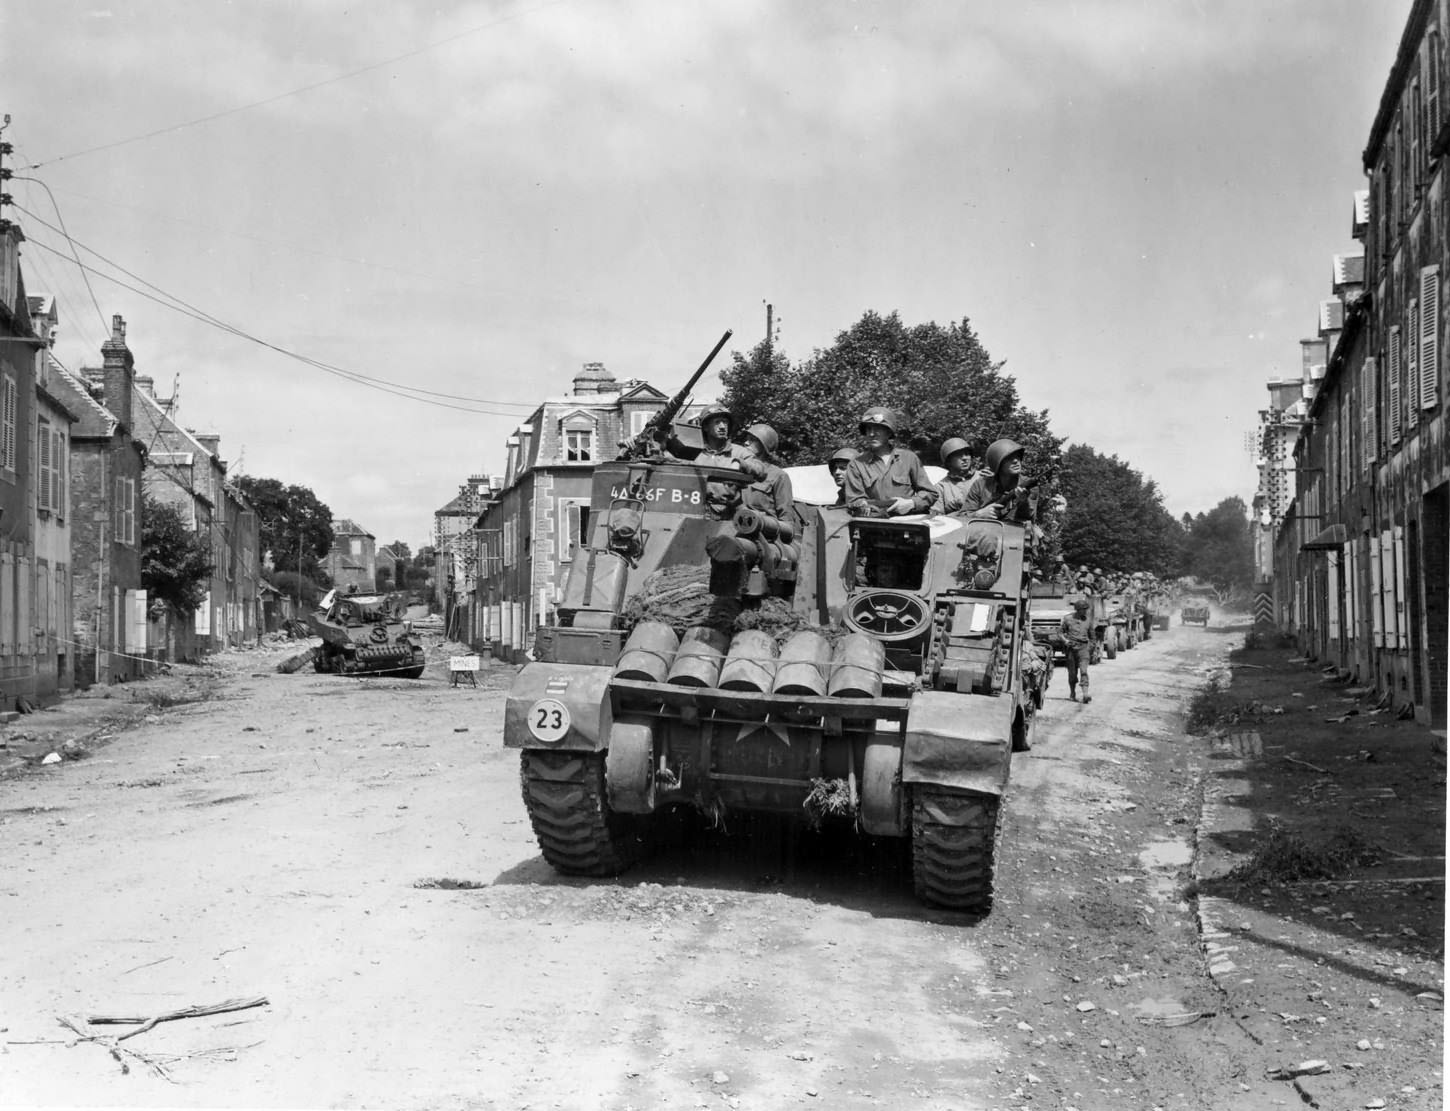 M7 of the 4th Armored Division, Coutances